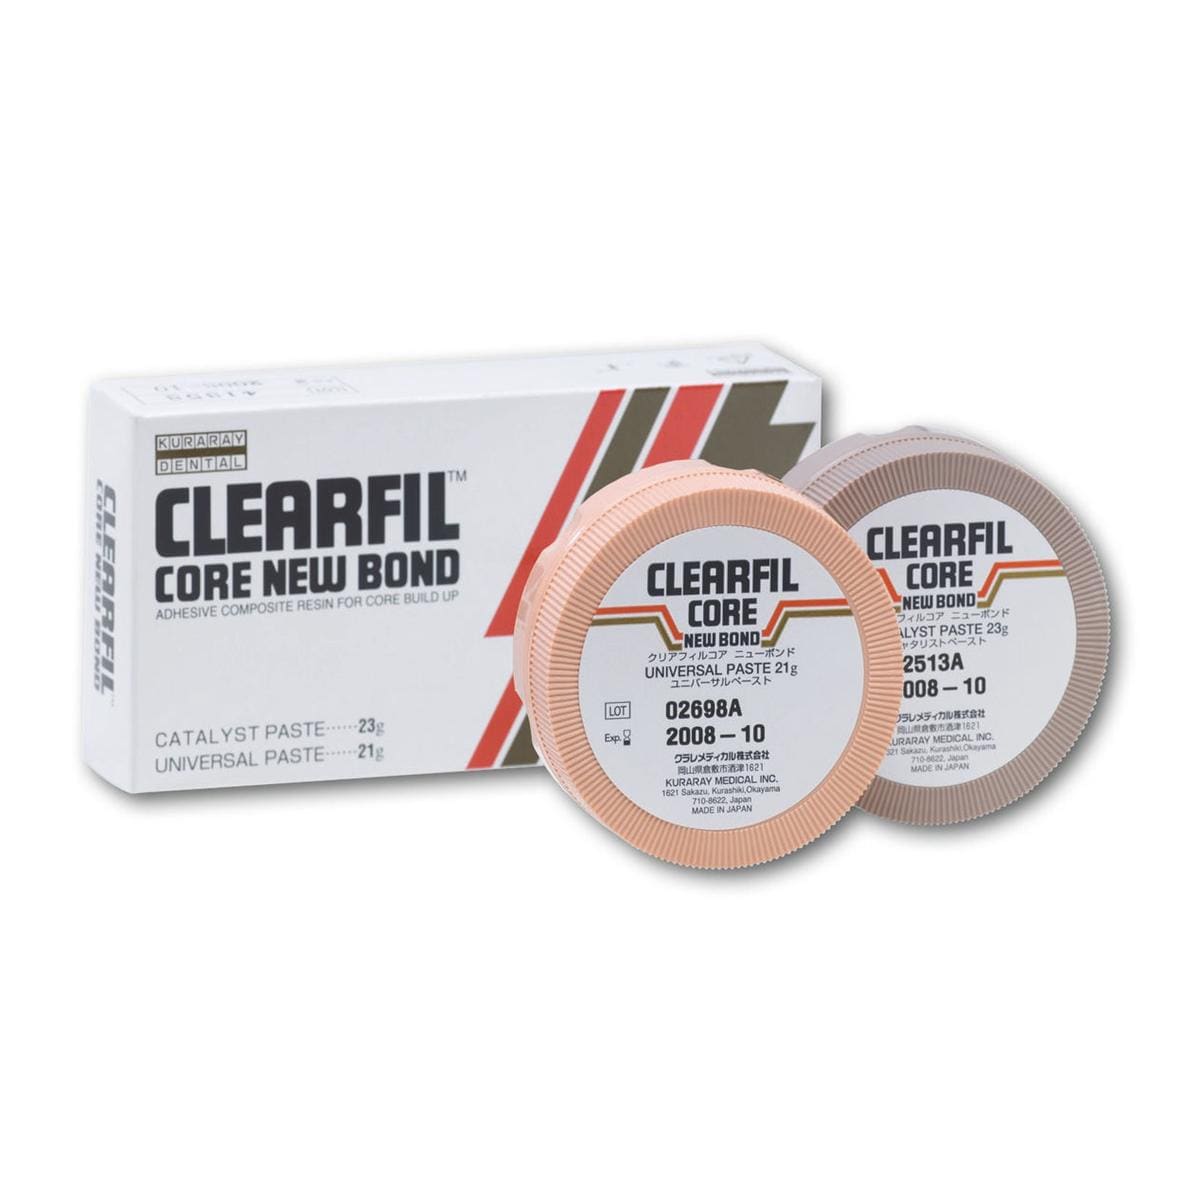 Clearfil Core New Bond - 21 g pte universal + 23 g pte catalyseur